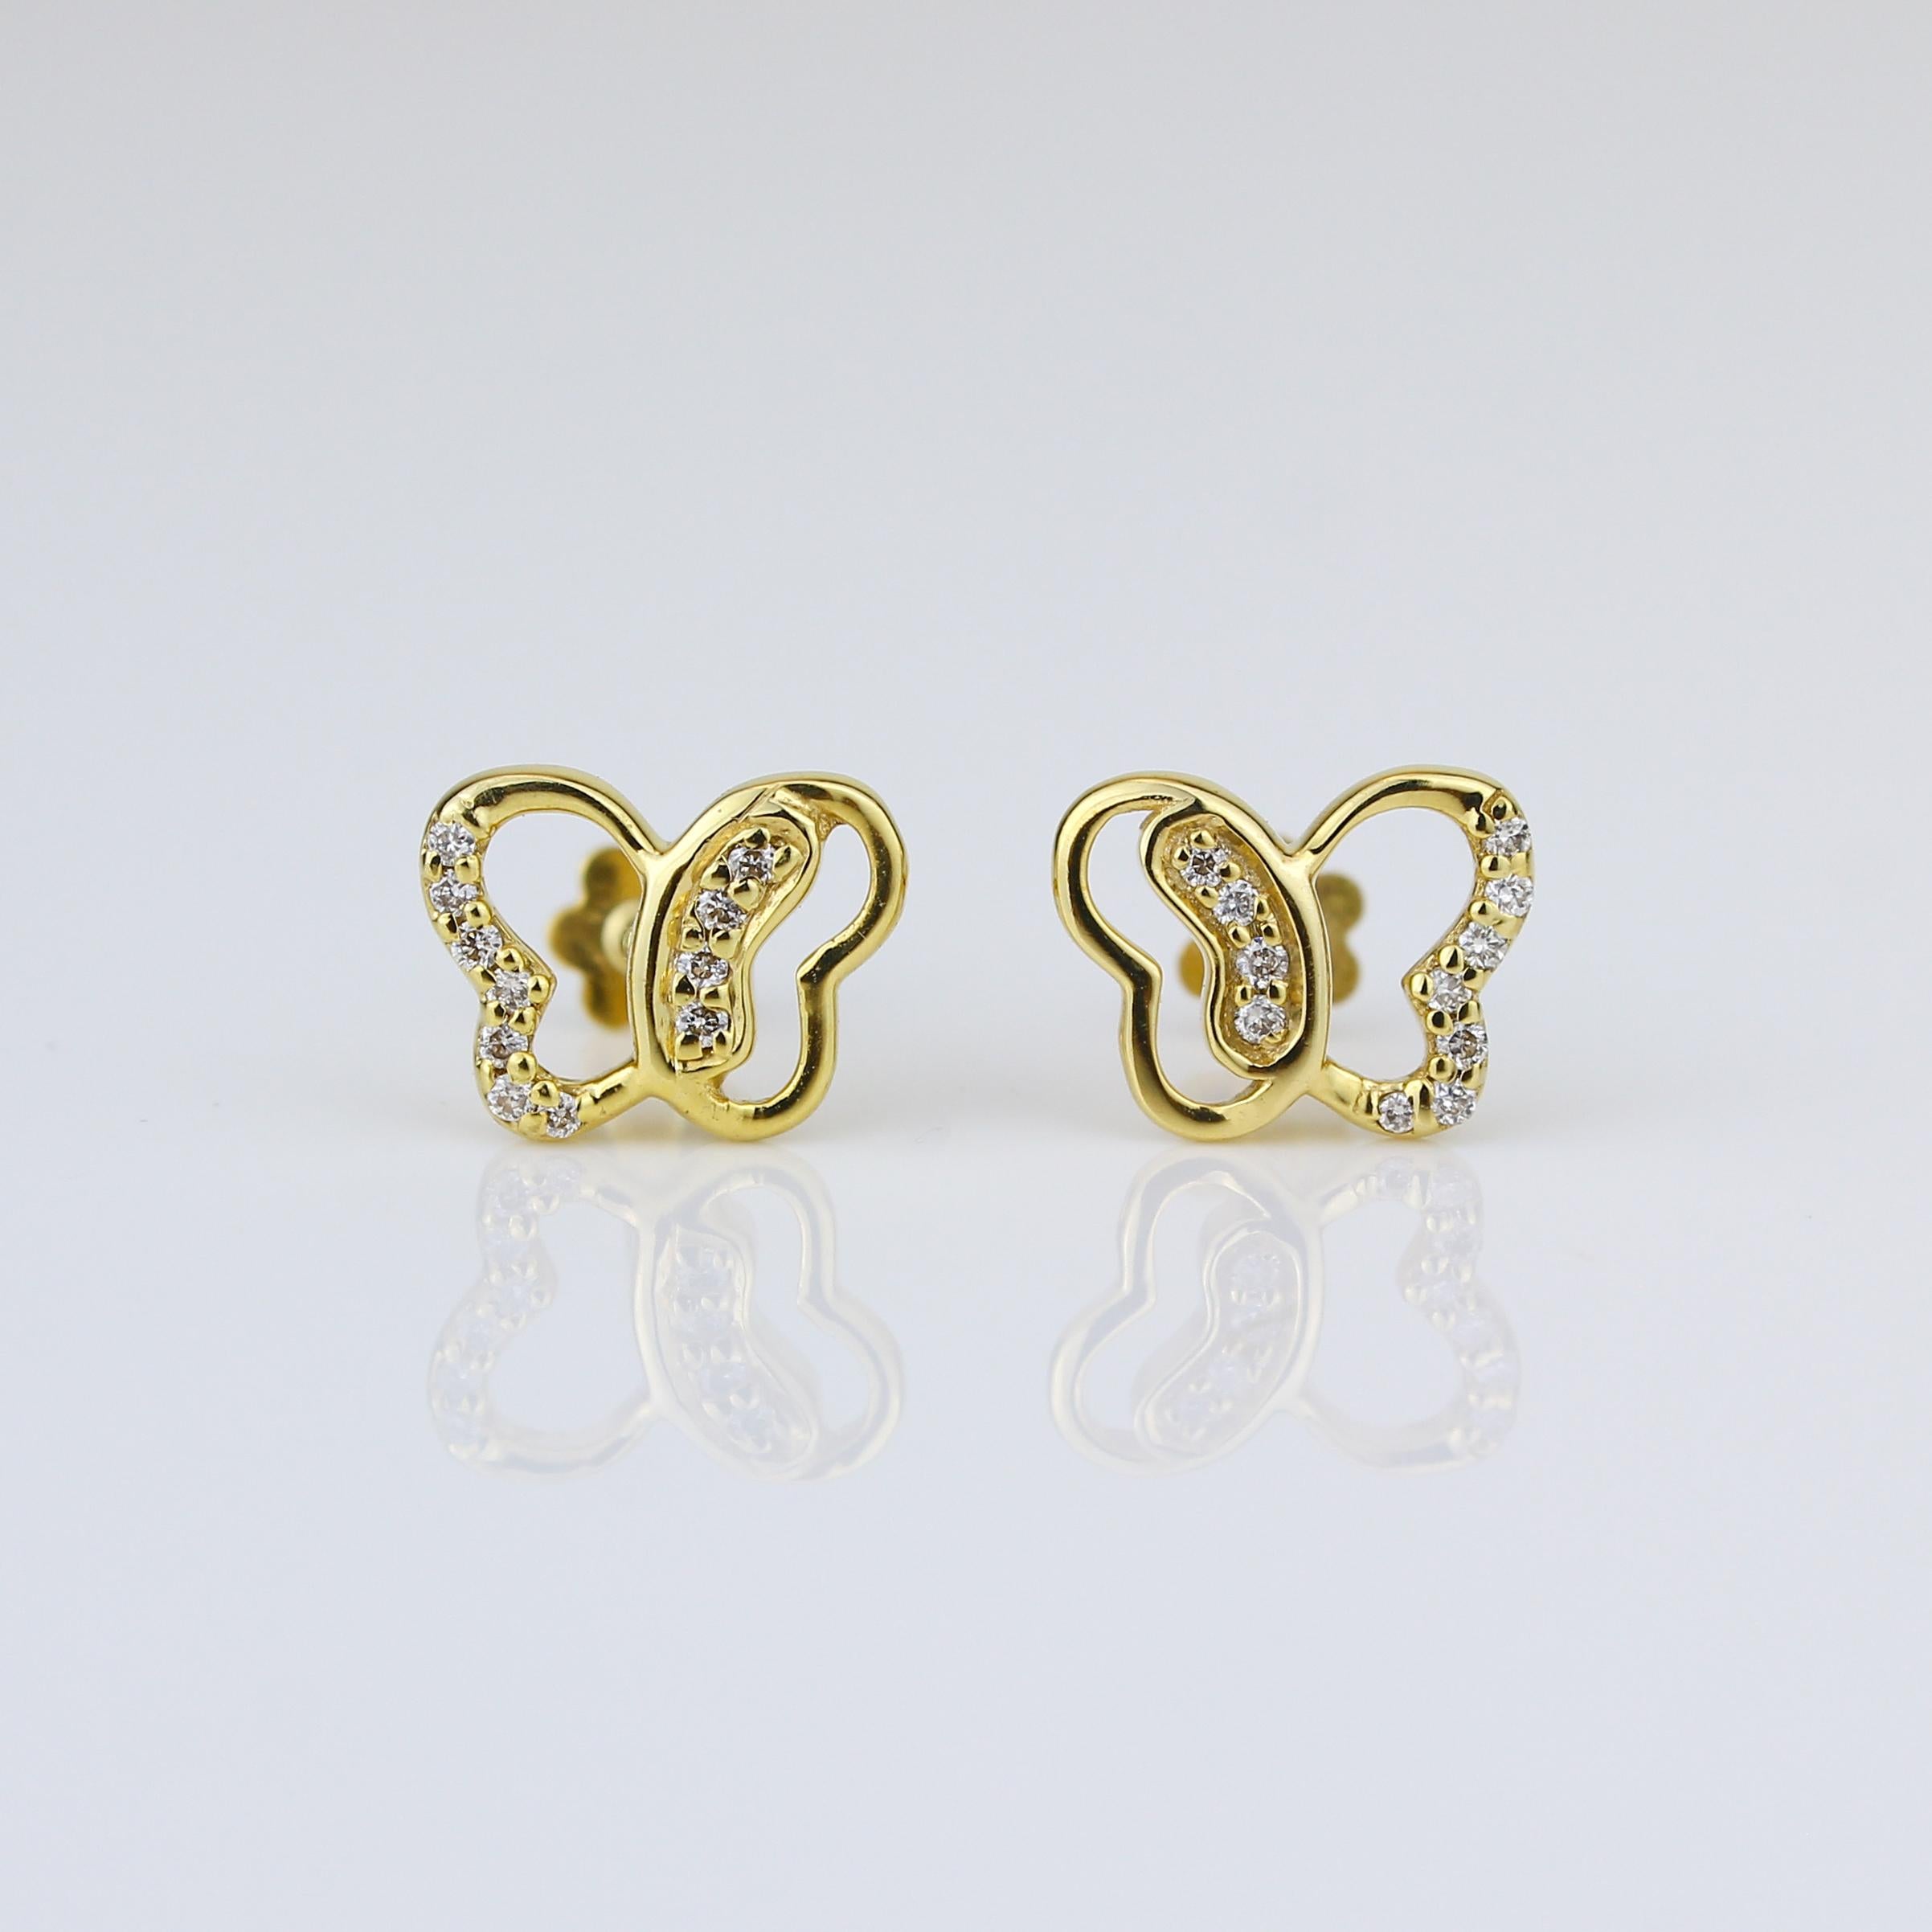 These delightful Butterfly Diamond Earrings, tailored for Girls (Kids/Toddlers), are a perfect blend of cuteness and sophistication. Crafted in lustrous 18K Solid Gold, these earrings feature charming butterfly motifs adorned with delicate diamonds.